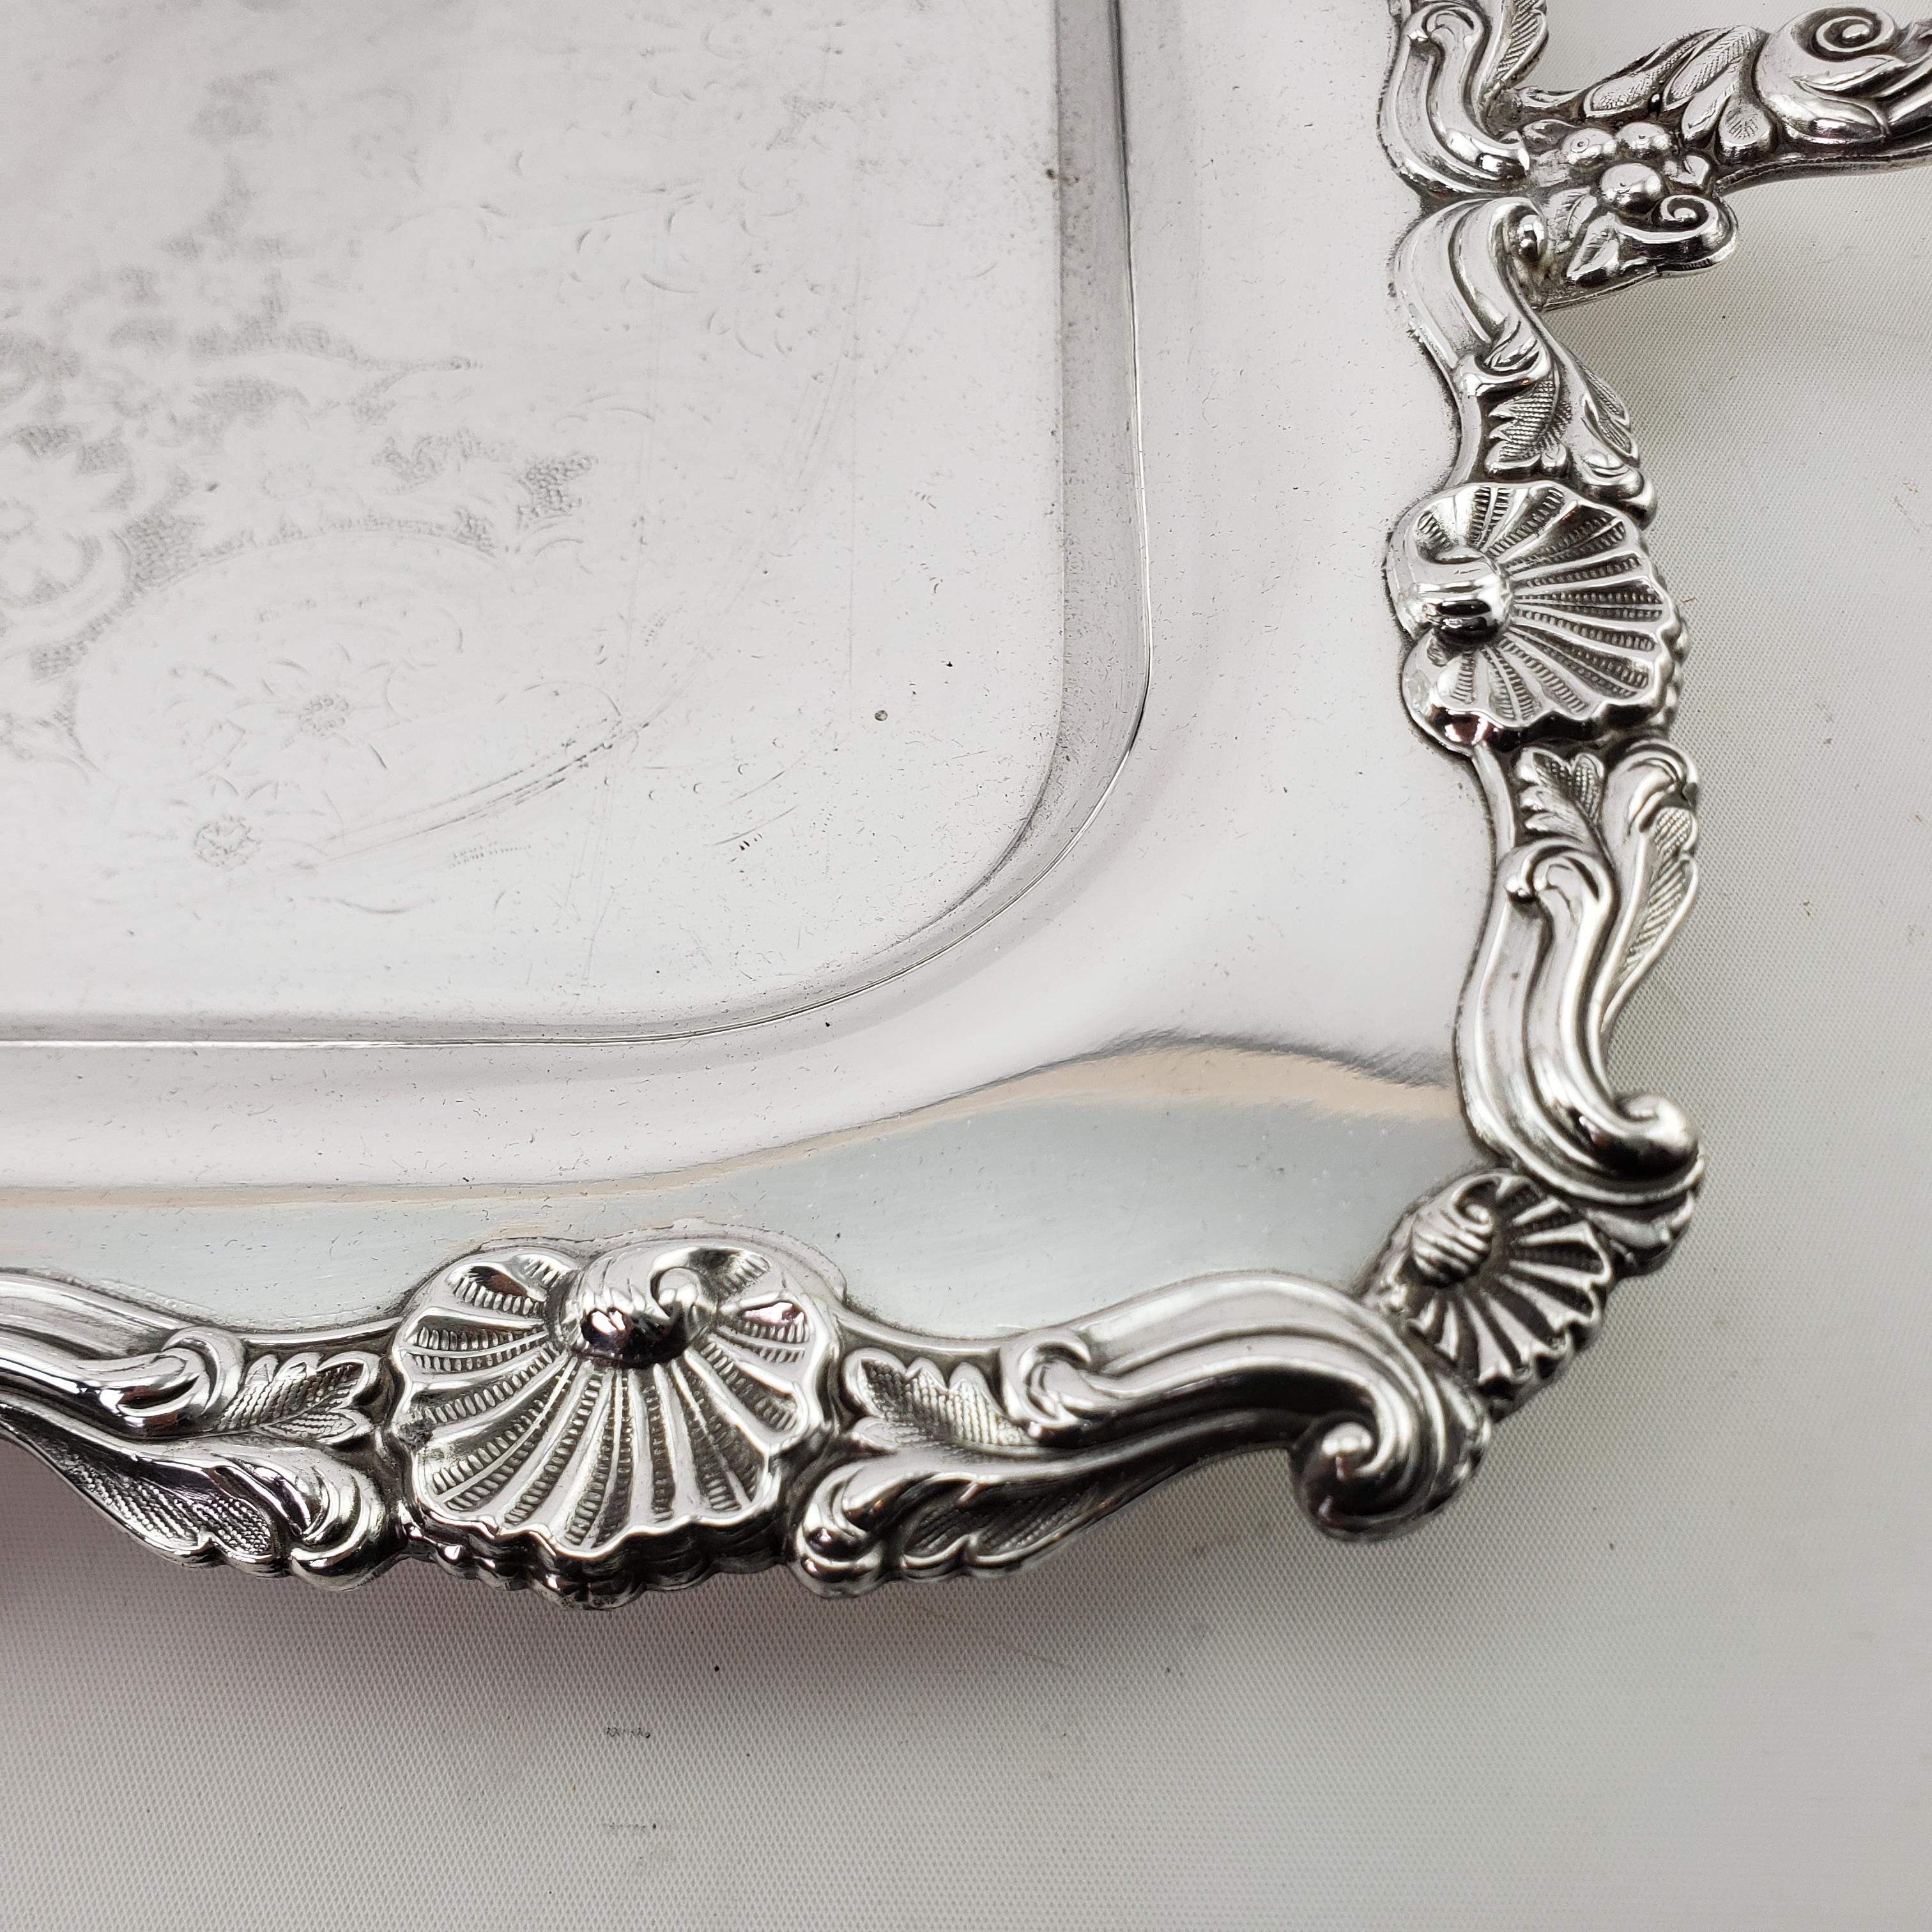 Antique Rectangular Silver Plated Serving Tray with Stylized Floral Decoration For Sale 2